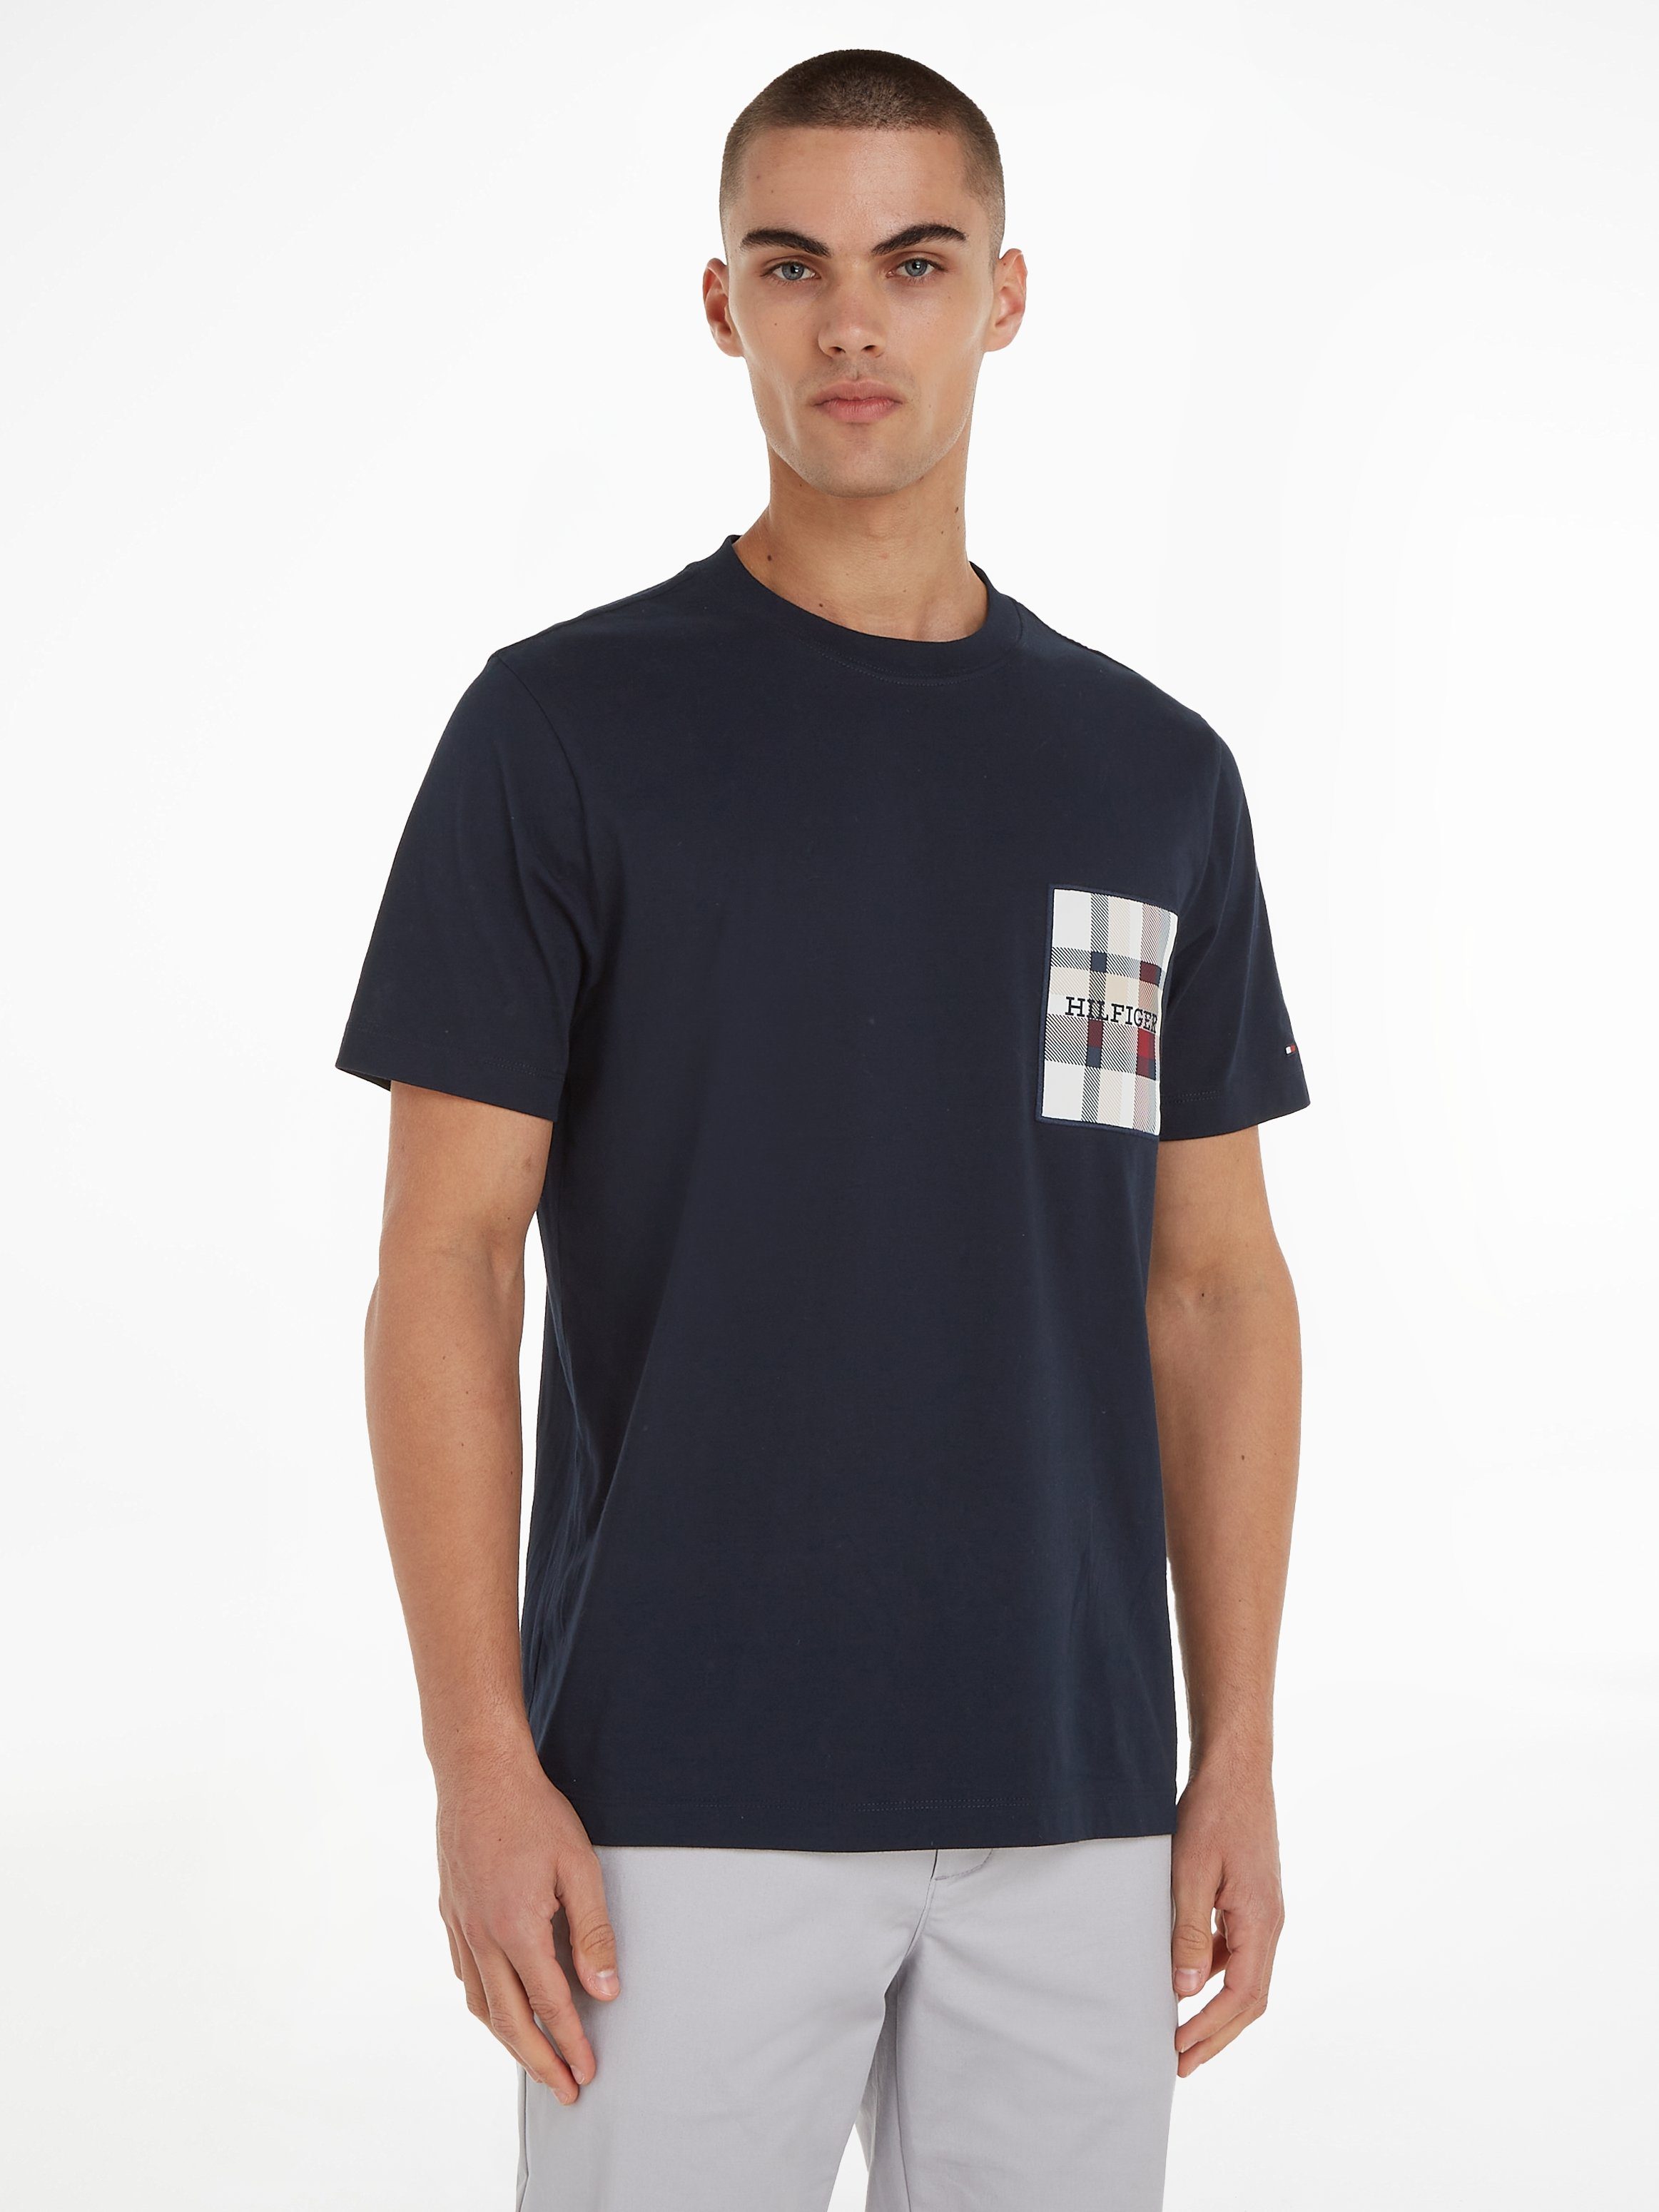 TEE CHECK LABEL T-Shirt Hilfiger MONOTYPE Tommy